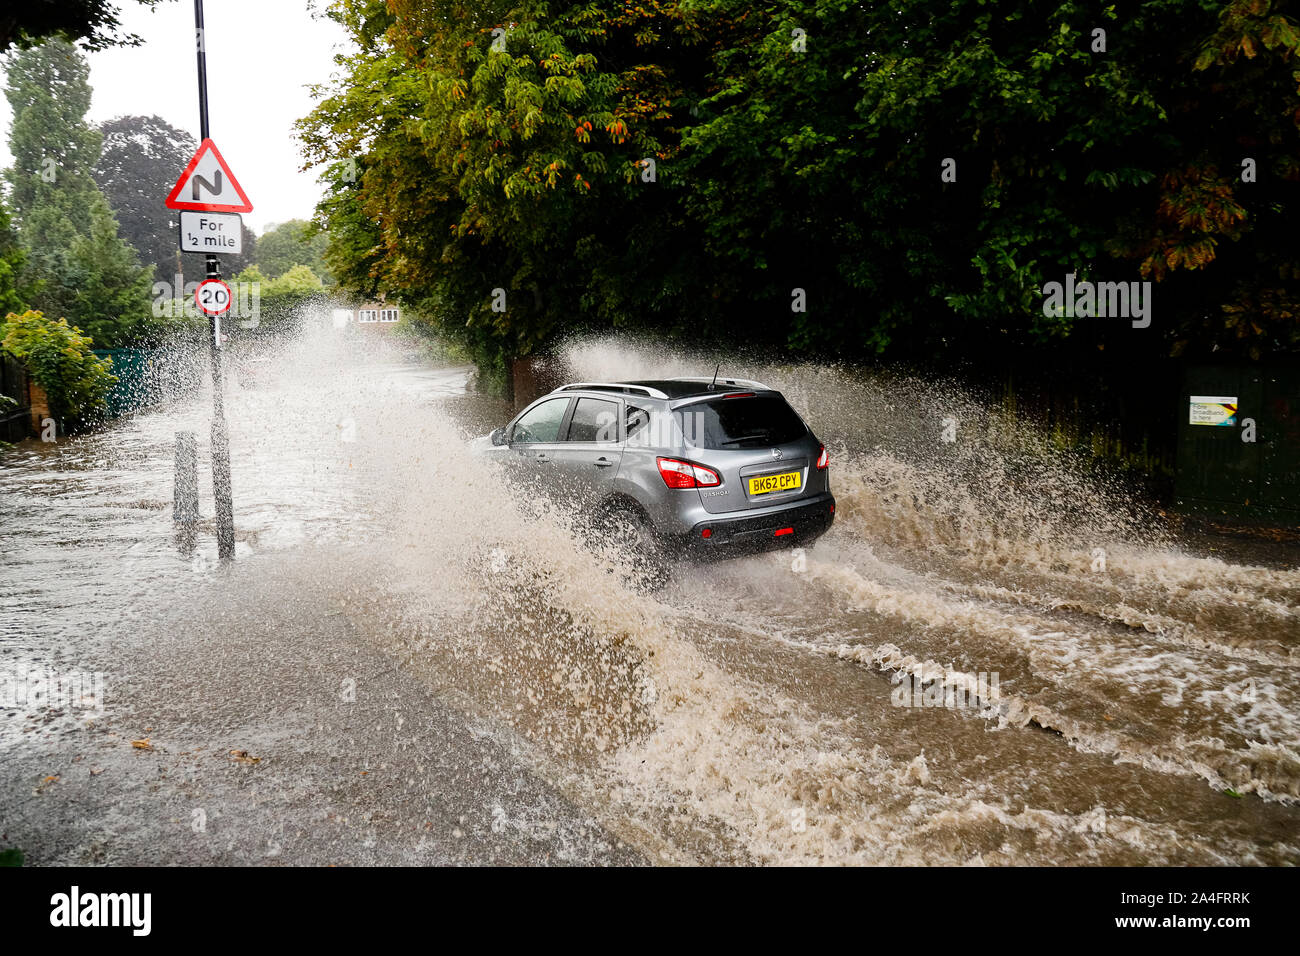 London, UK. A Nissan Qashqai enters flood water at high speed in Kenley, south London, where torrential rain caused the road to flood in under half an Stock Photo